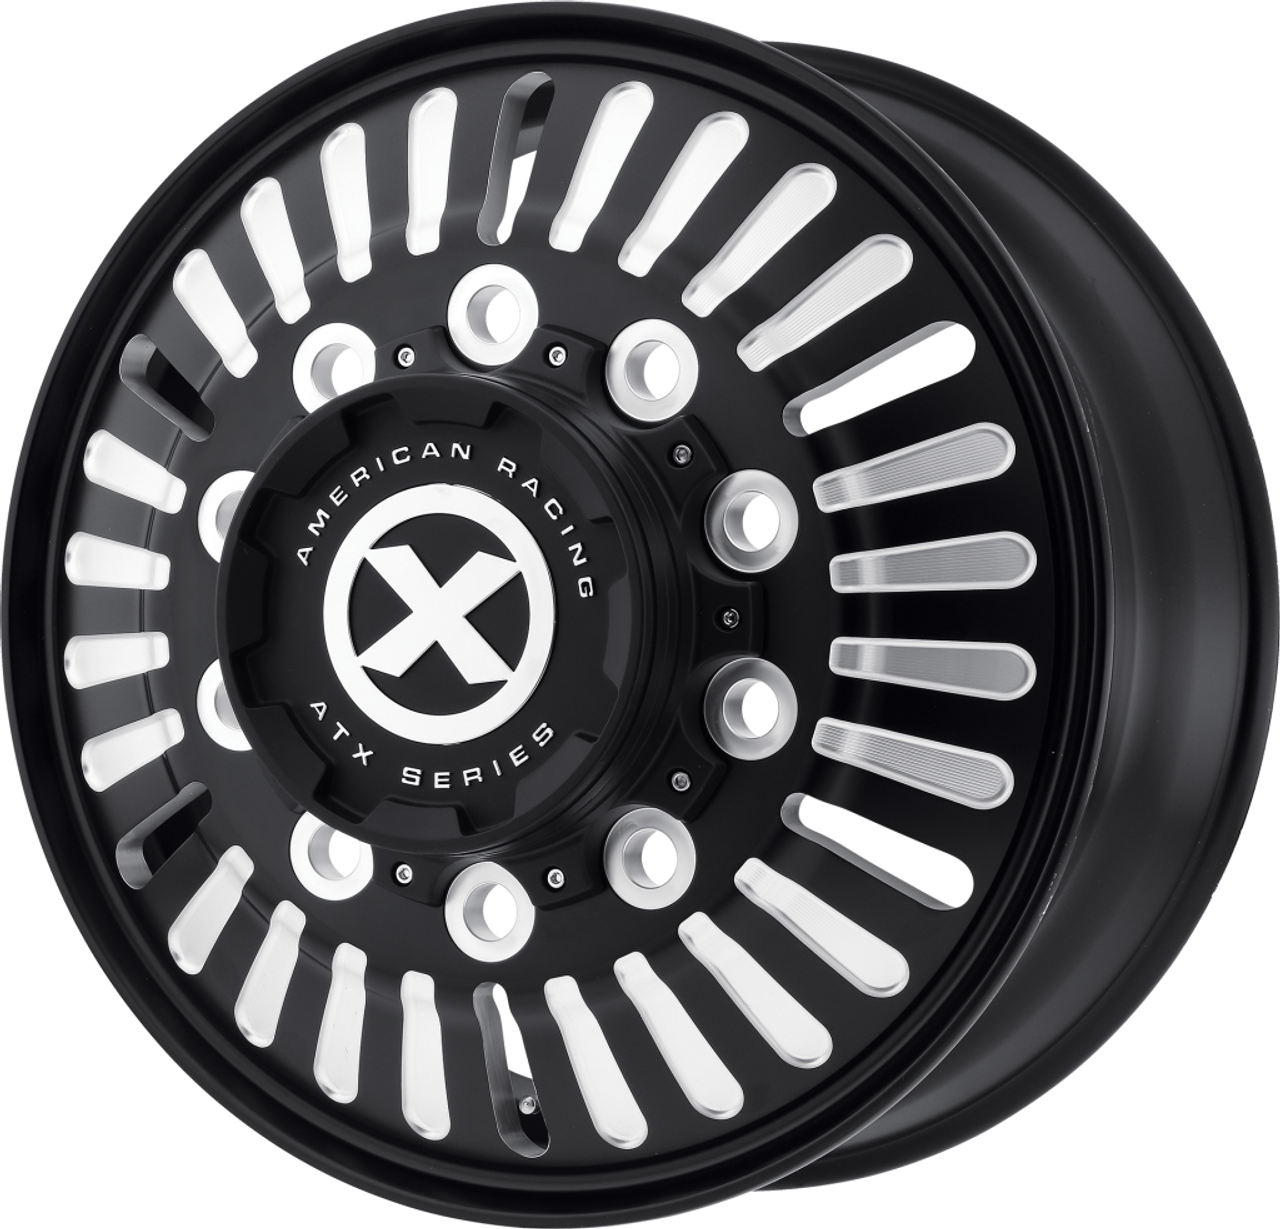 ATX AO403 Roulette 22.5x8.25 10x11.25 Satin Black Milled - Front Wheel 22.5" 144